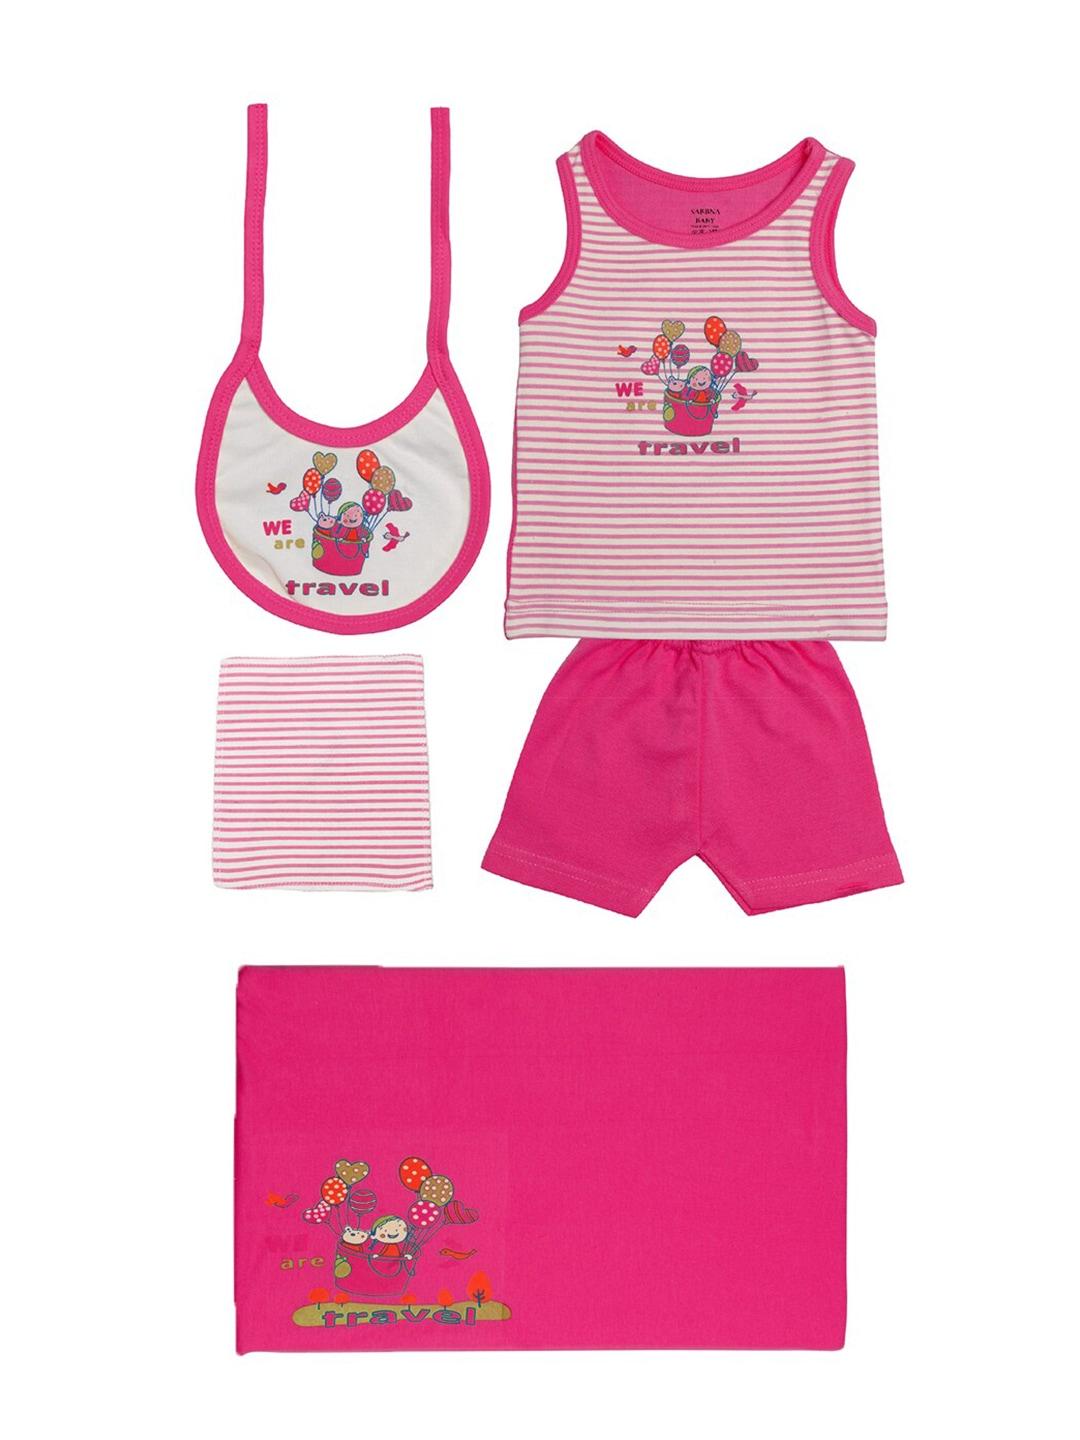 tiny hug infant boys pink & white printed pure cotton top with shorts clothing set